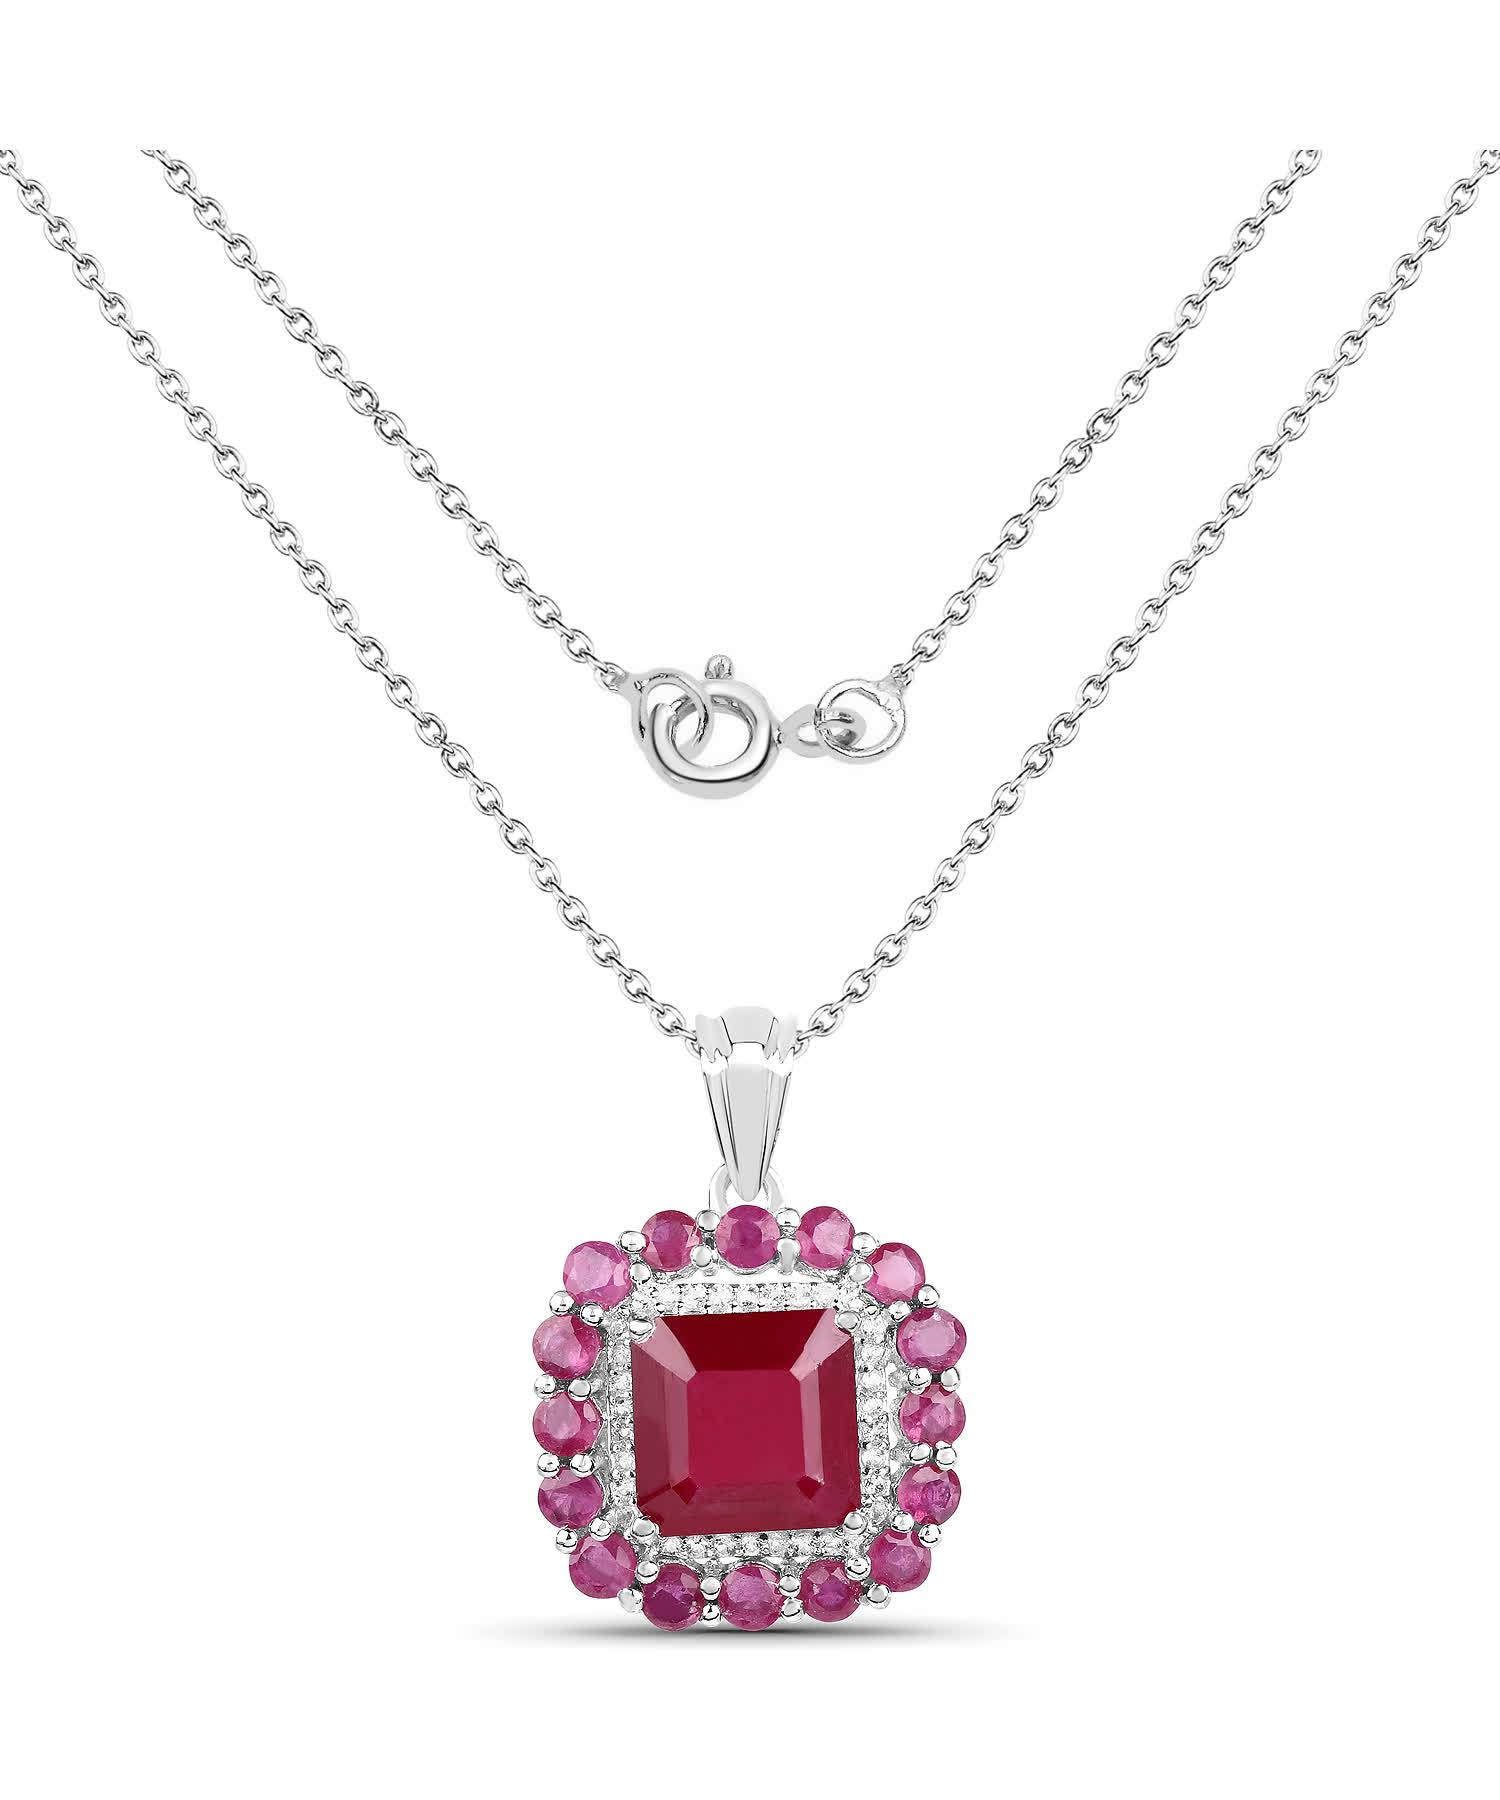 8.73ctw Natural Ruby and Topaz Rhodium Plated 925 Sterling Silver Fashion Pendant With Chain View 2